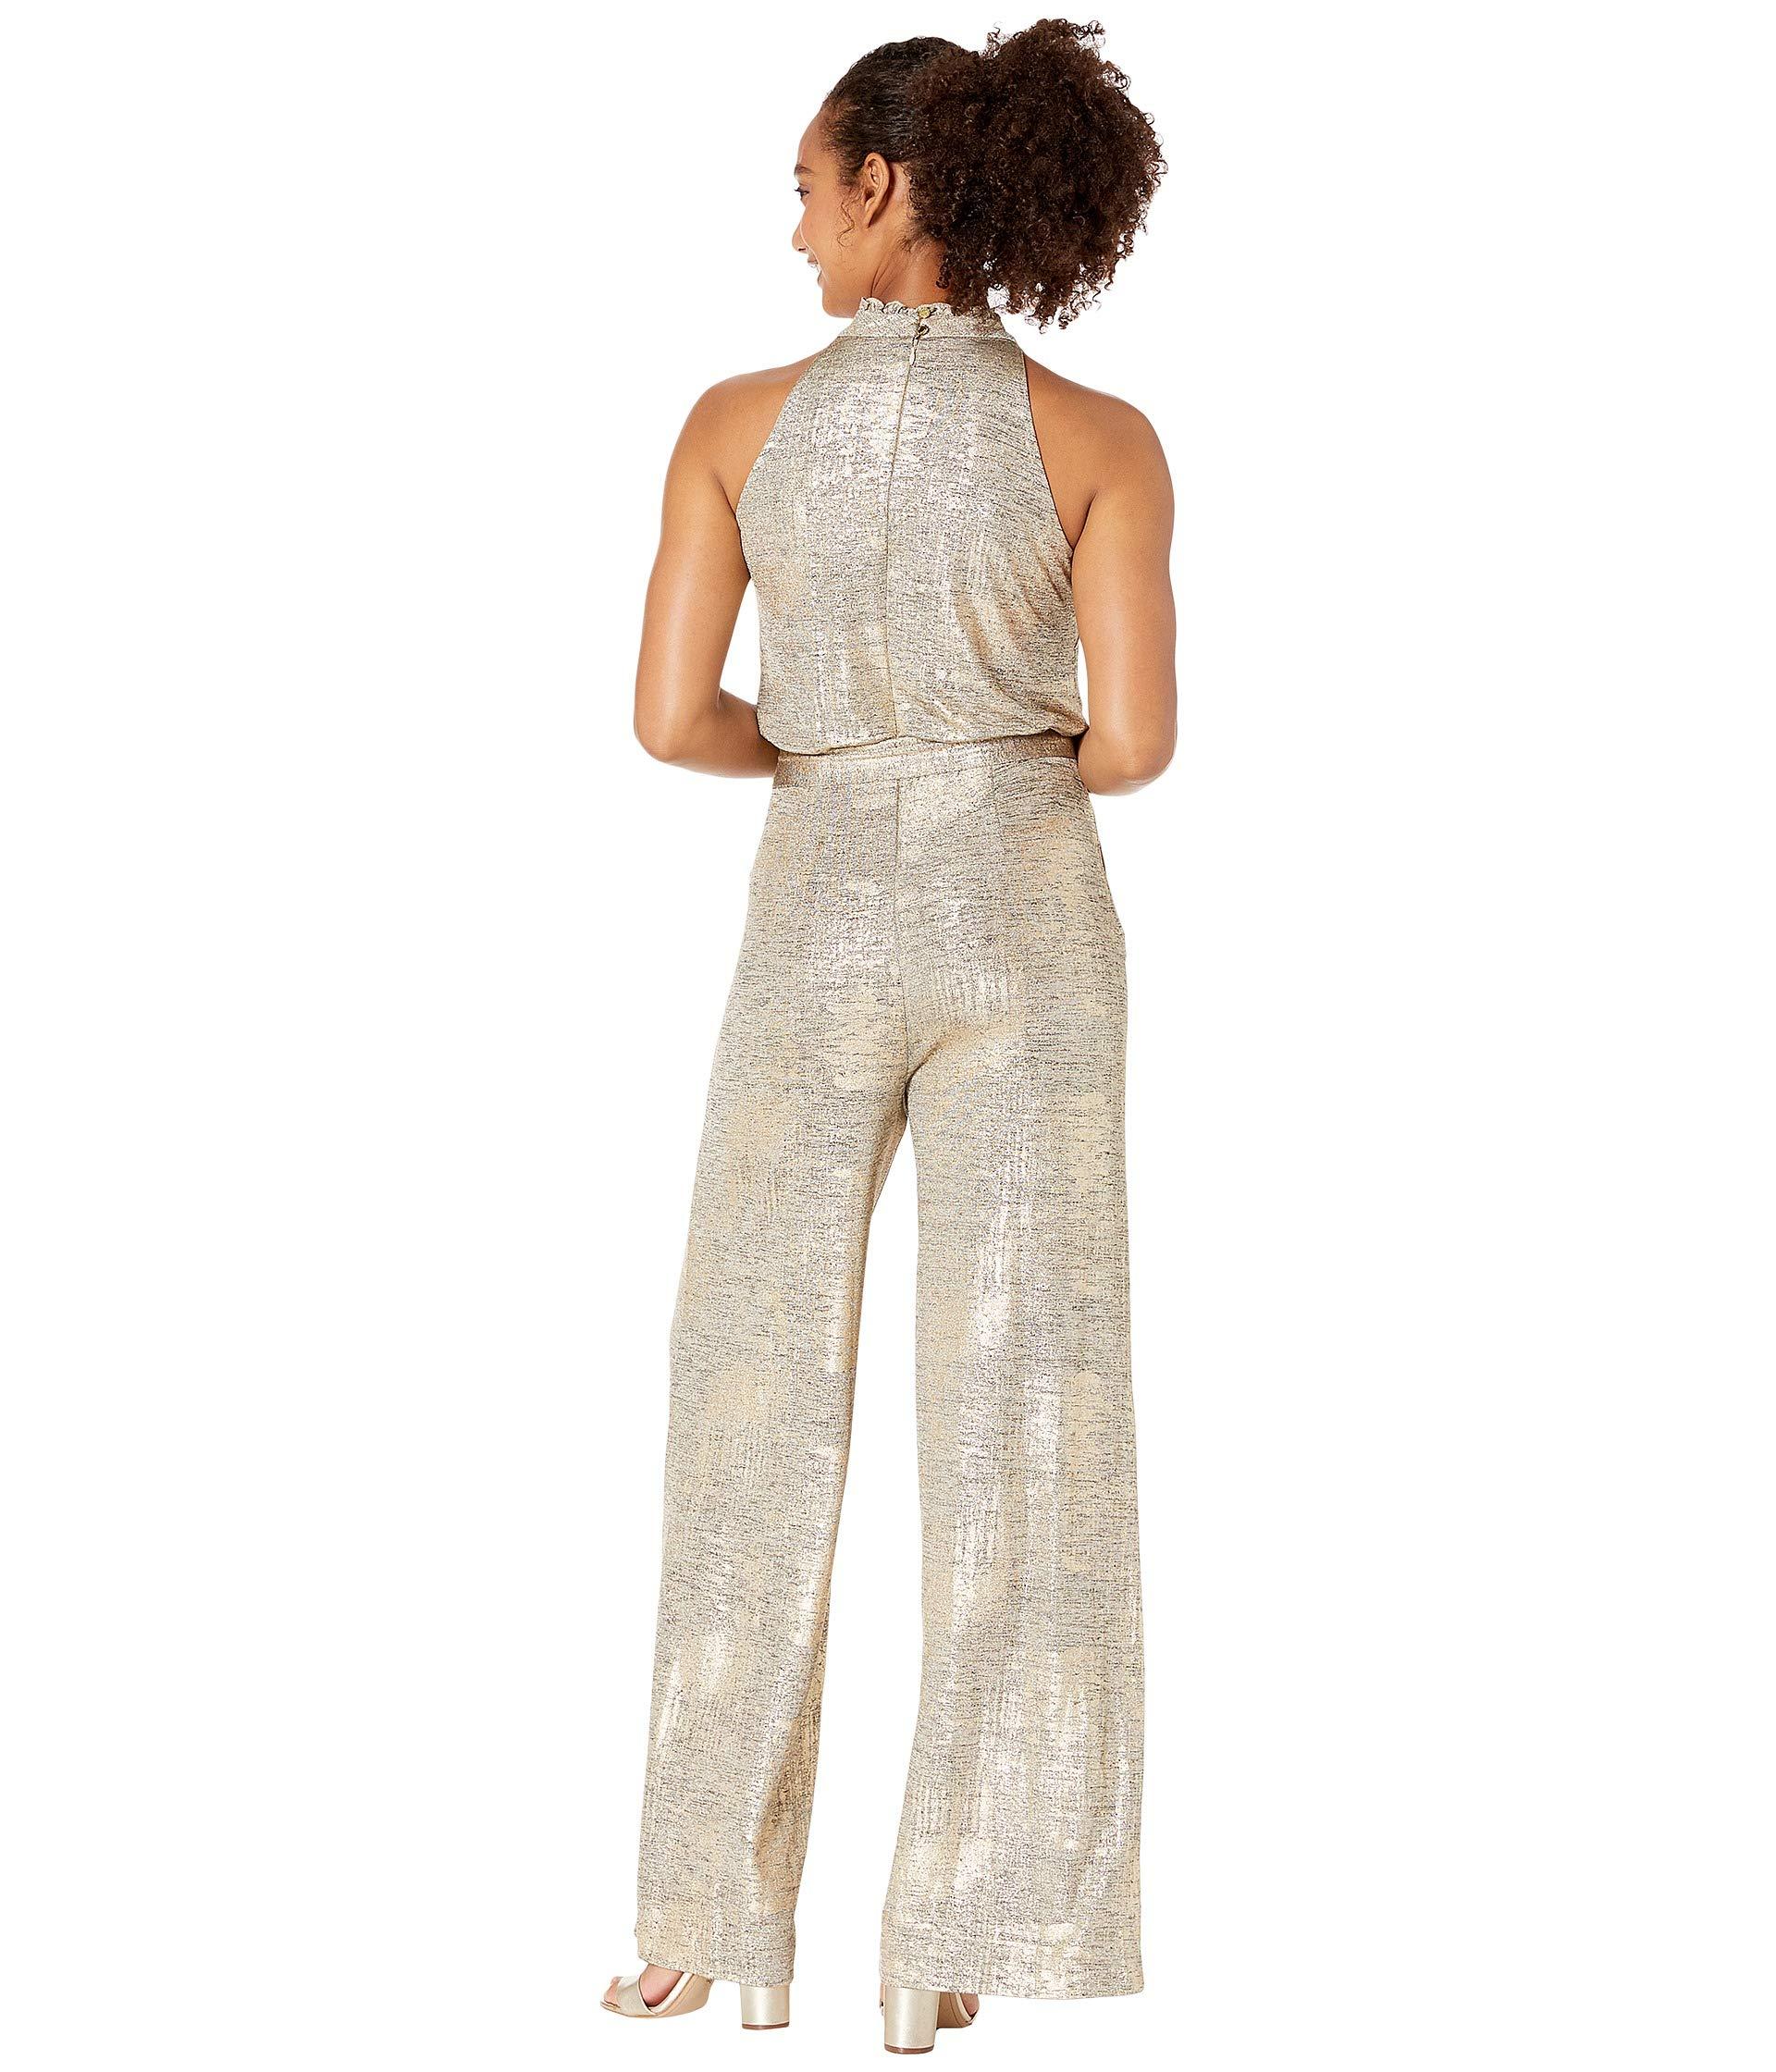 Vince Camuto Synthetic Metallic Halter Jumpsuit - Lyst